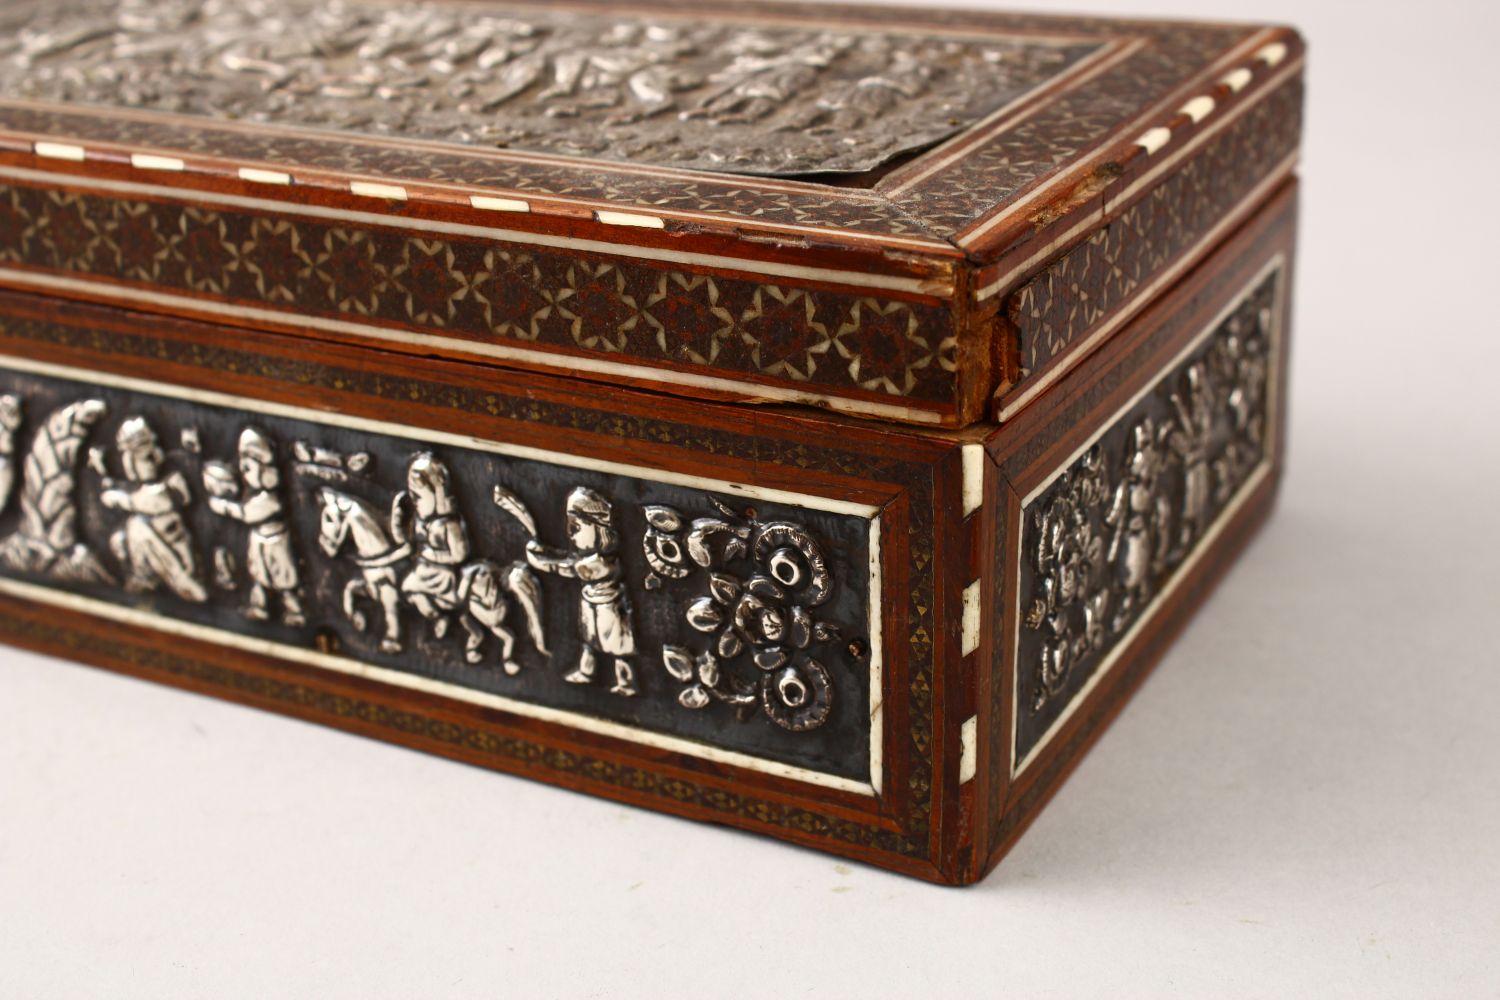 A GOOD IRANIAN SHIRAZ KHATEMI WOODEN & WHITE METAL BOX, the bod with inset white metal embossed - Image 7 of 10